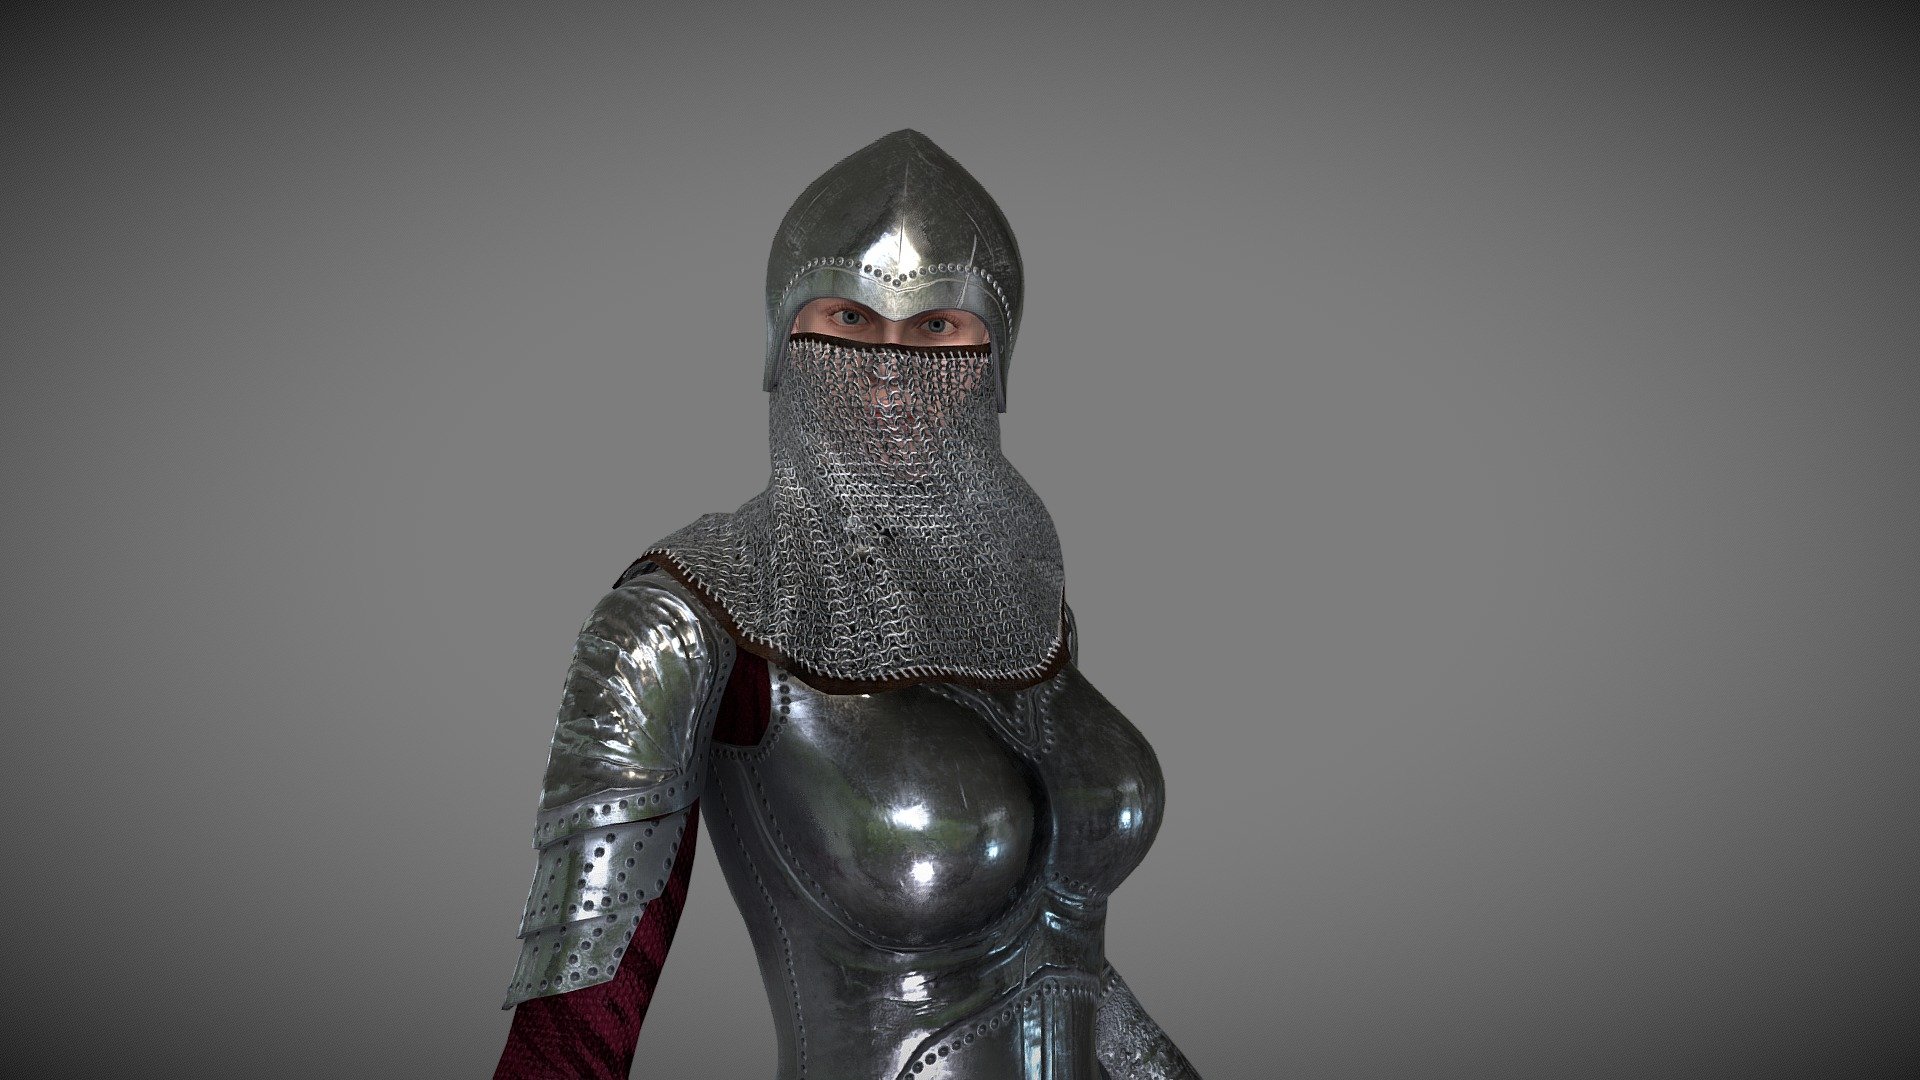 Medieval warrior

RIgged with
ActorCore Armature 

you download more pose from 
https://actorcore.reallusion.com/motion/Combat?tag=Female&amp;asset=heroine_strut

Software Used
* Blender
* Substance Painter
* Unreal Engine 4

Maps
4K Armor and Body Texture 
* Base Color
* Normal
* Occlusion
* Roughness
* Metallic - Medieval warrior - Buy Royalty Free 3D model by uday14viru 3d model